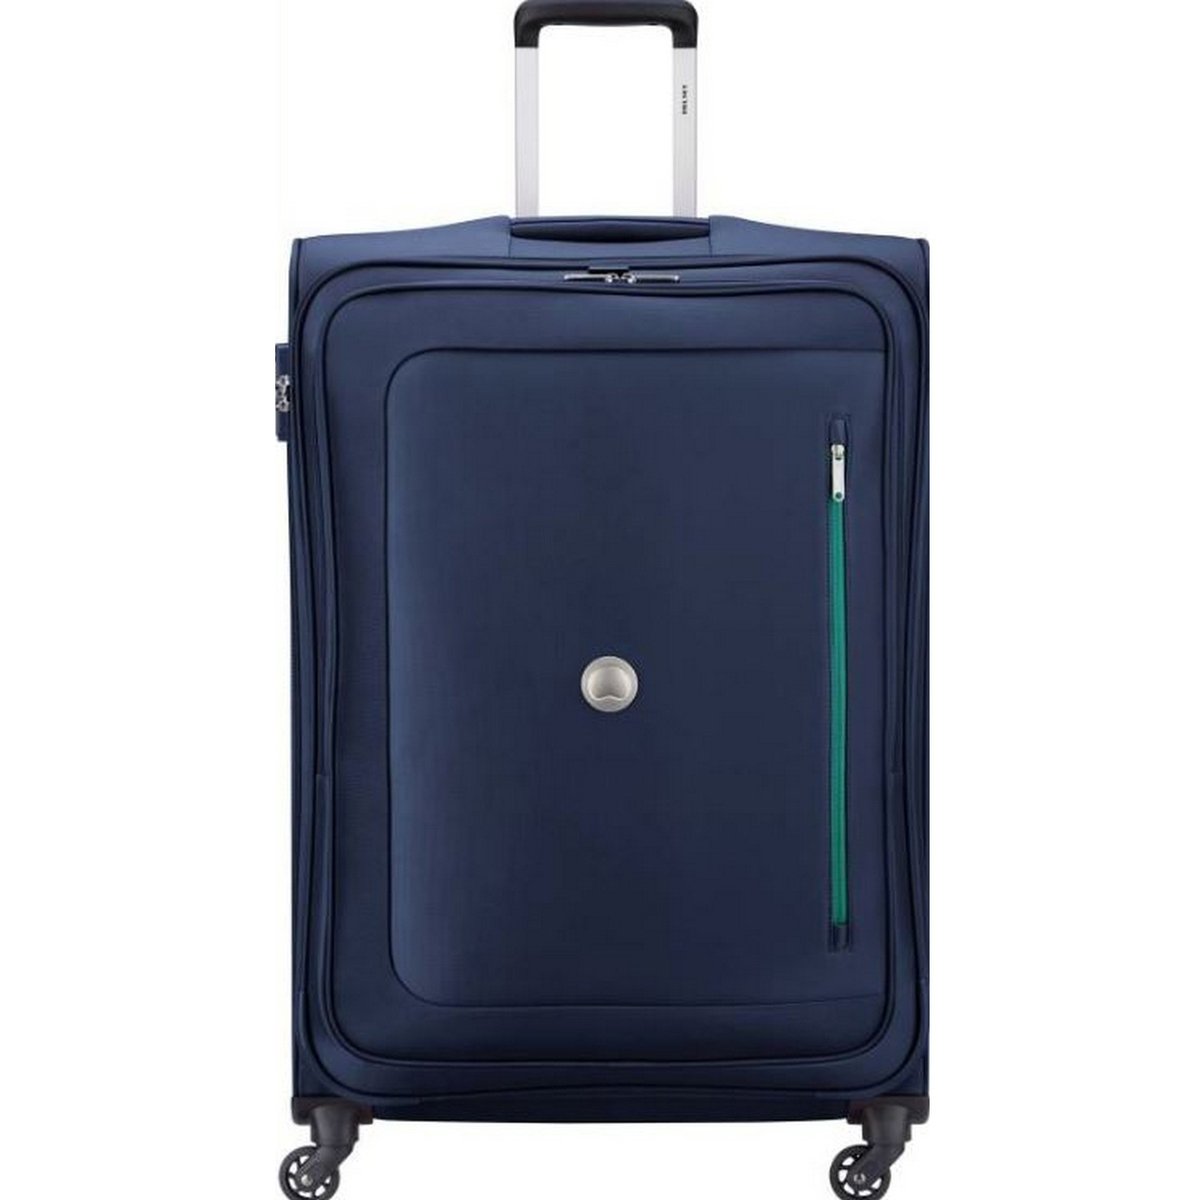 Delsey Oural 4 Wheel Soft Trolley 78cm Navy Blue